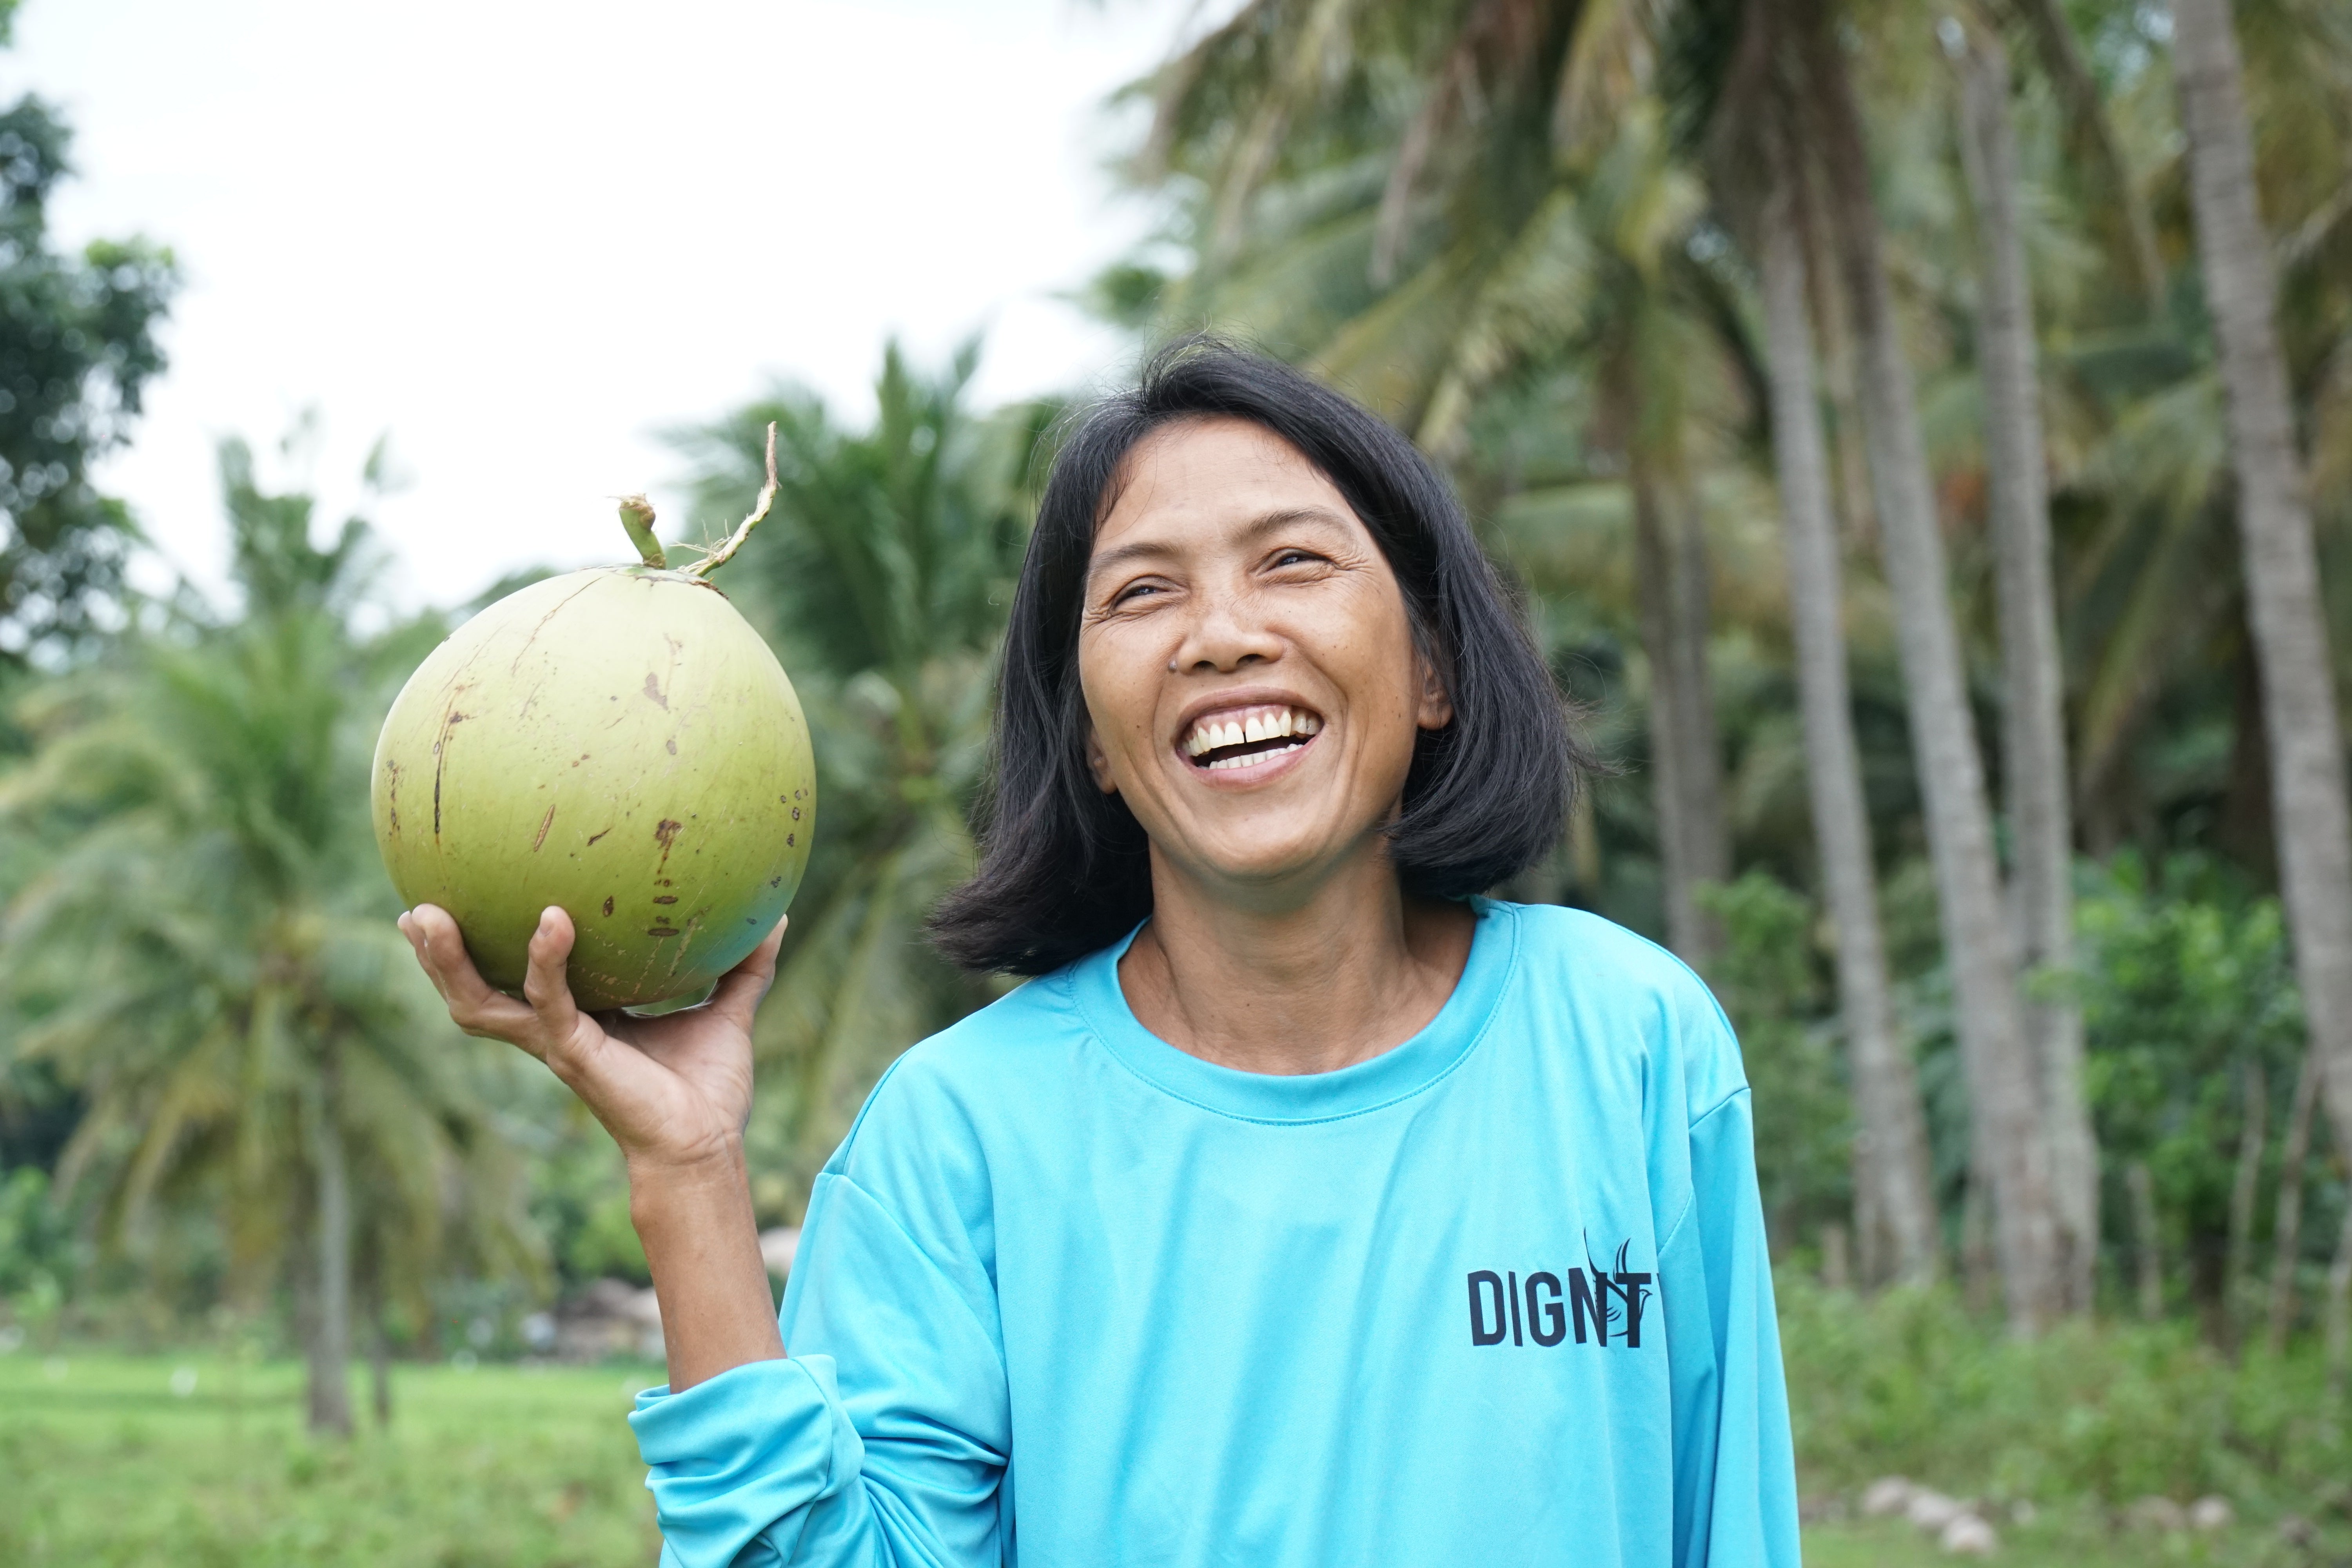 Dignity Coconut farmer looking happy and holding up a coconut